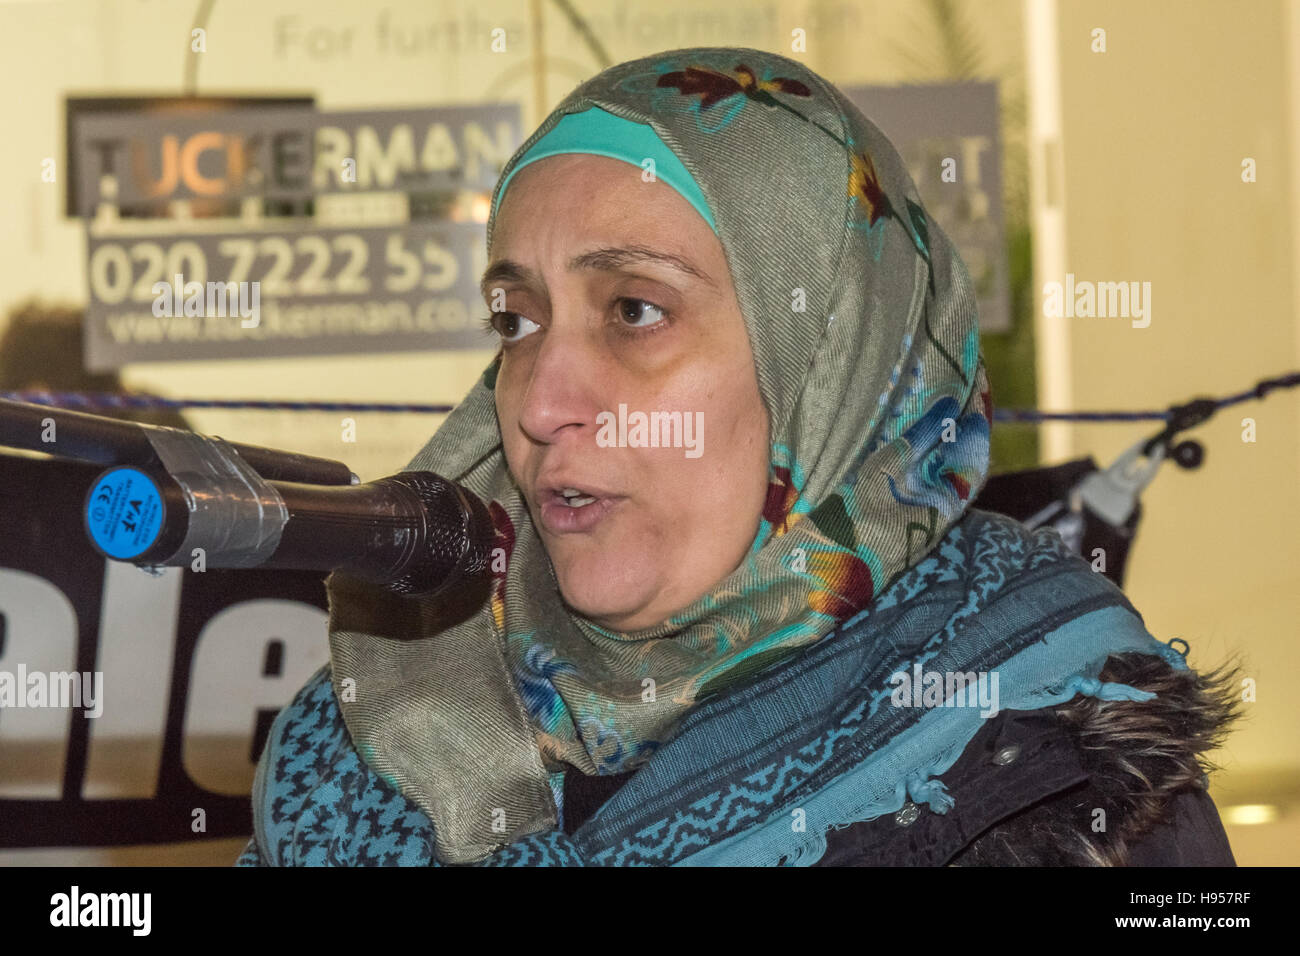 London, UK. 18th November 2016. Laila Sharary, wife of Fayez Shahary, speaks about the arrest of her husband at the protest by human rights group Inminds outside the headquarters of British security company G4S over the abduction by Israel and subsequent torture of British national and father of five Fayez Sharary. Arrested by Israeli forces  on 15 September when leaving the West Bank for Jordan with his wife and youngest child to fly home after a family visit he was tortured for 3 weeks by Israeli secret police to force a confession An Israeli judge declared this worthless and inadmissible an Stock Photo